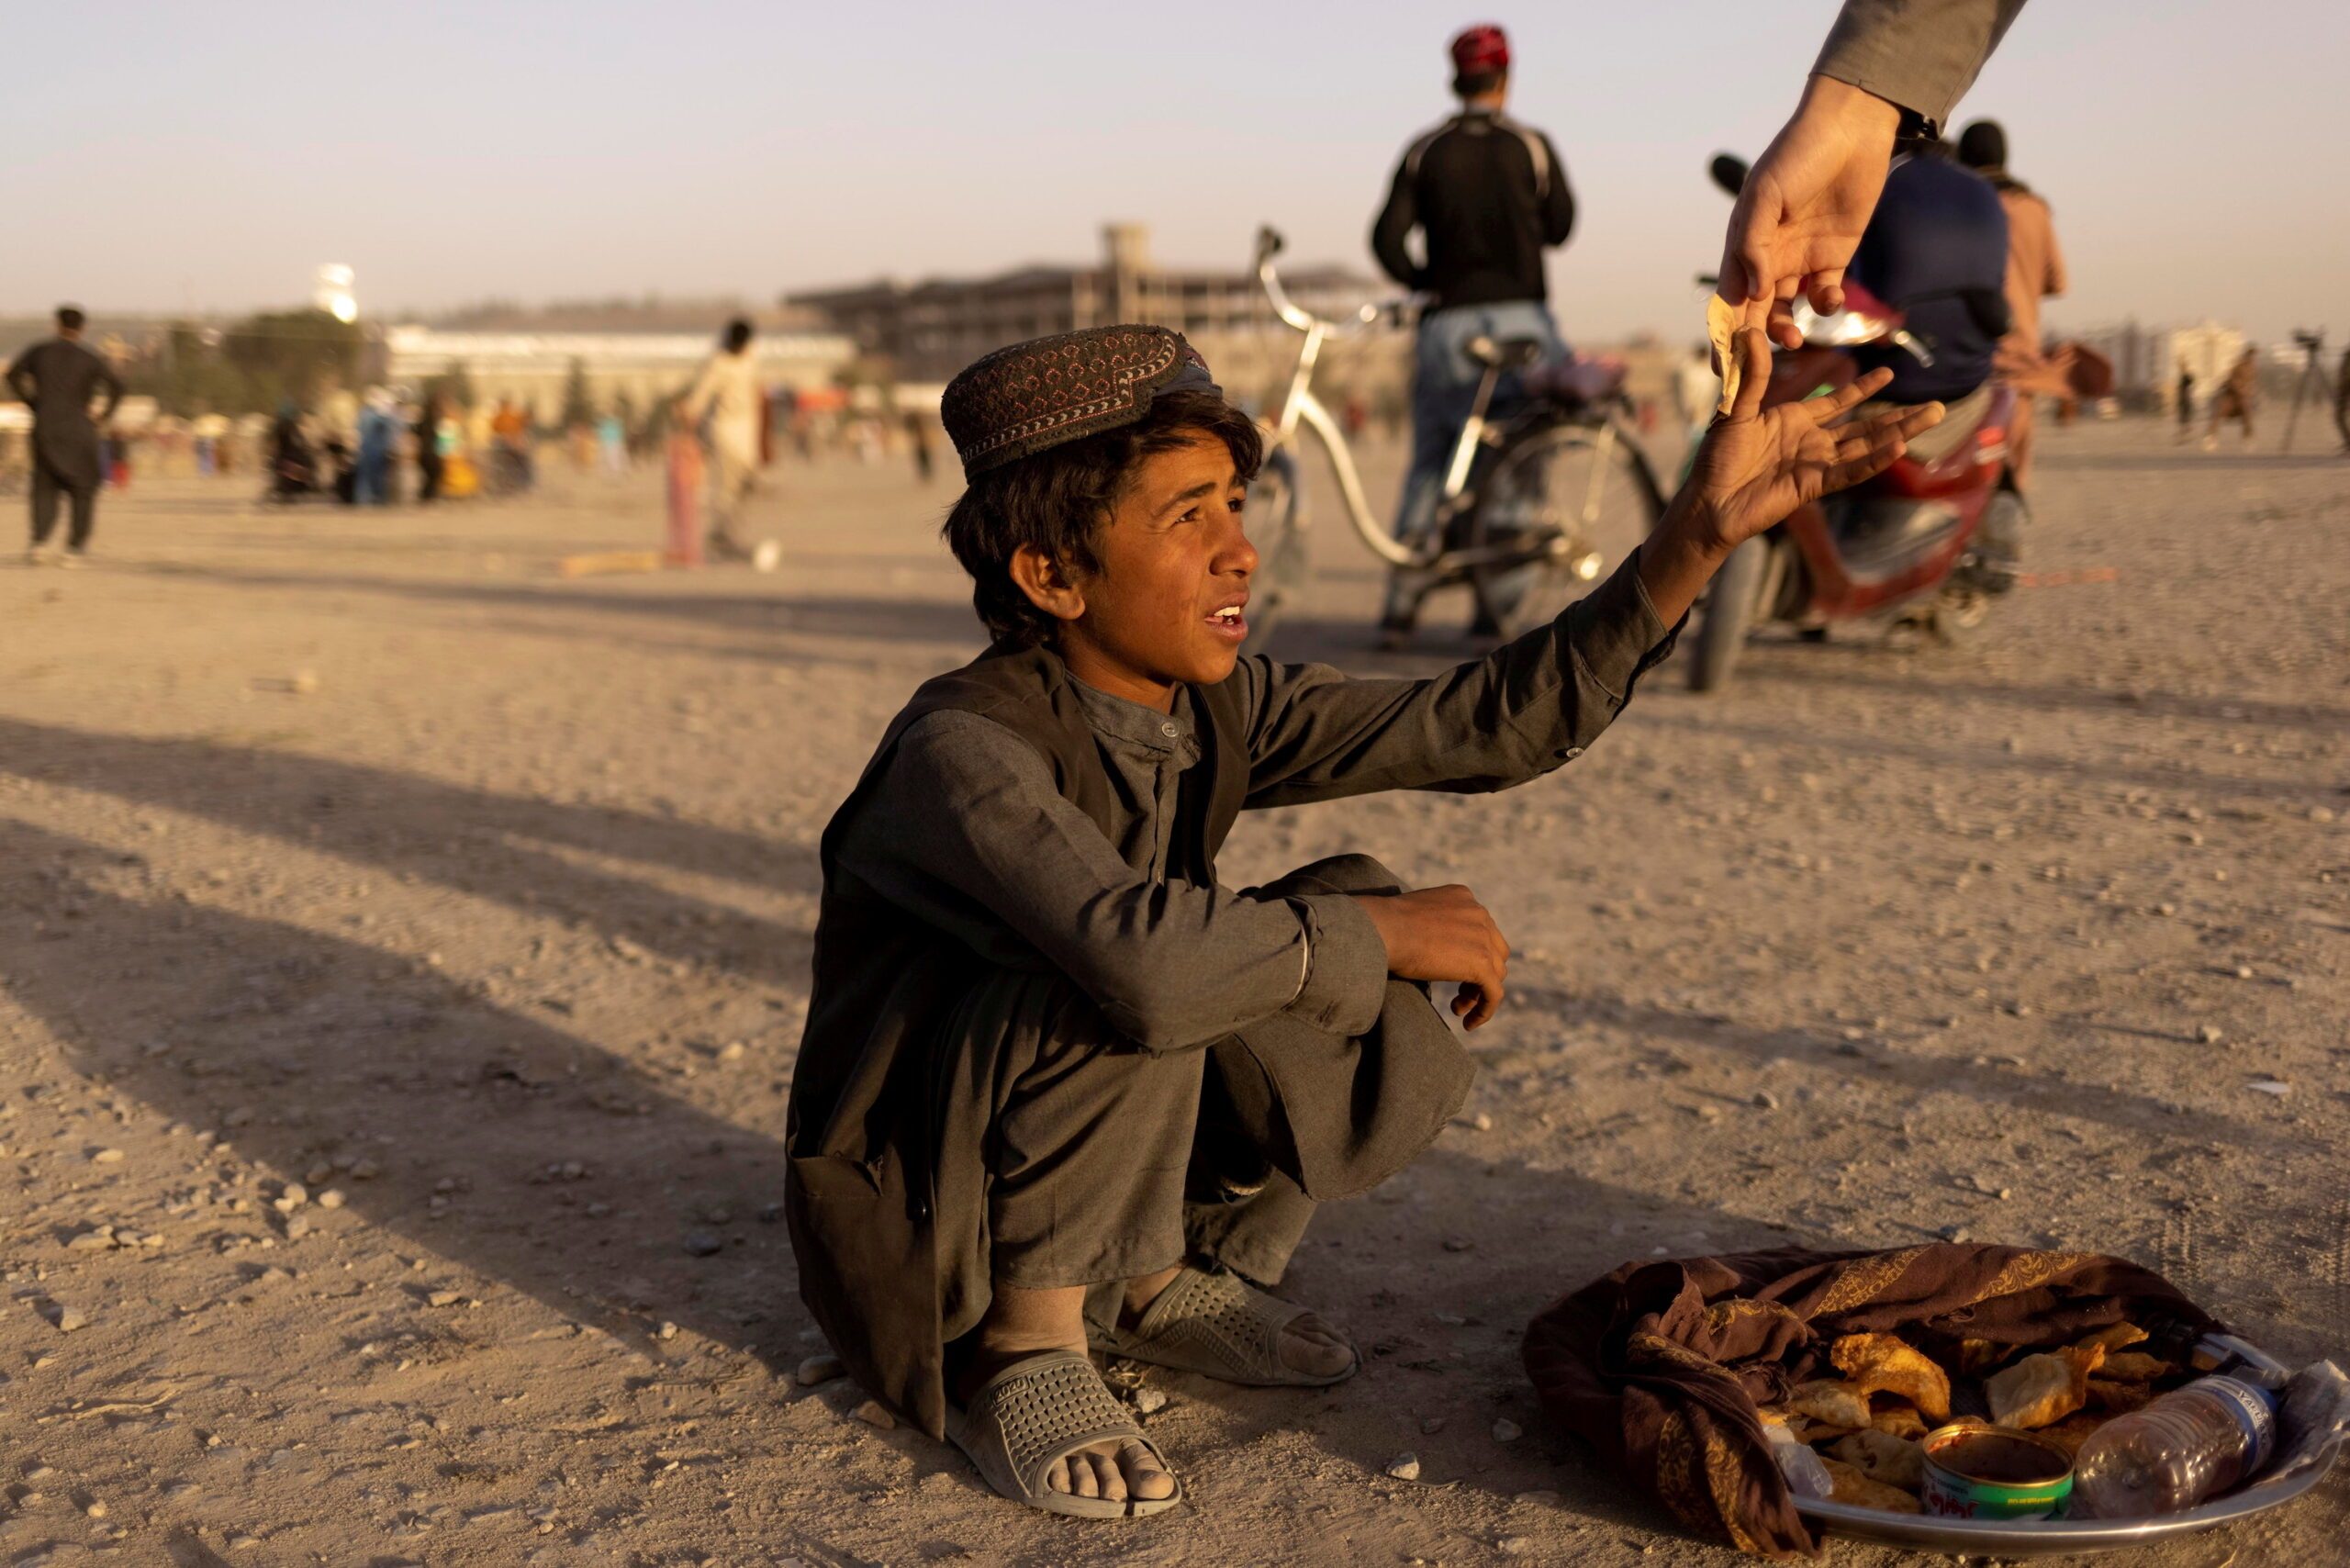 World Bank backs using $280 million in frozen aid funds for Afghanistan